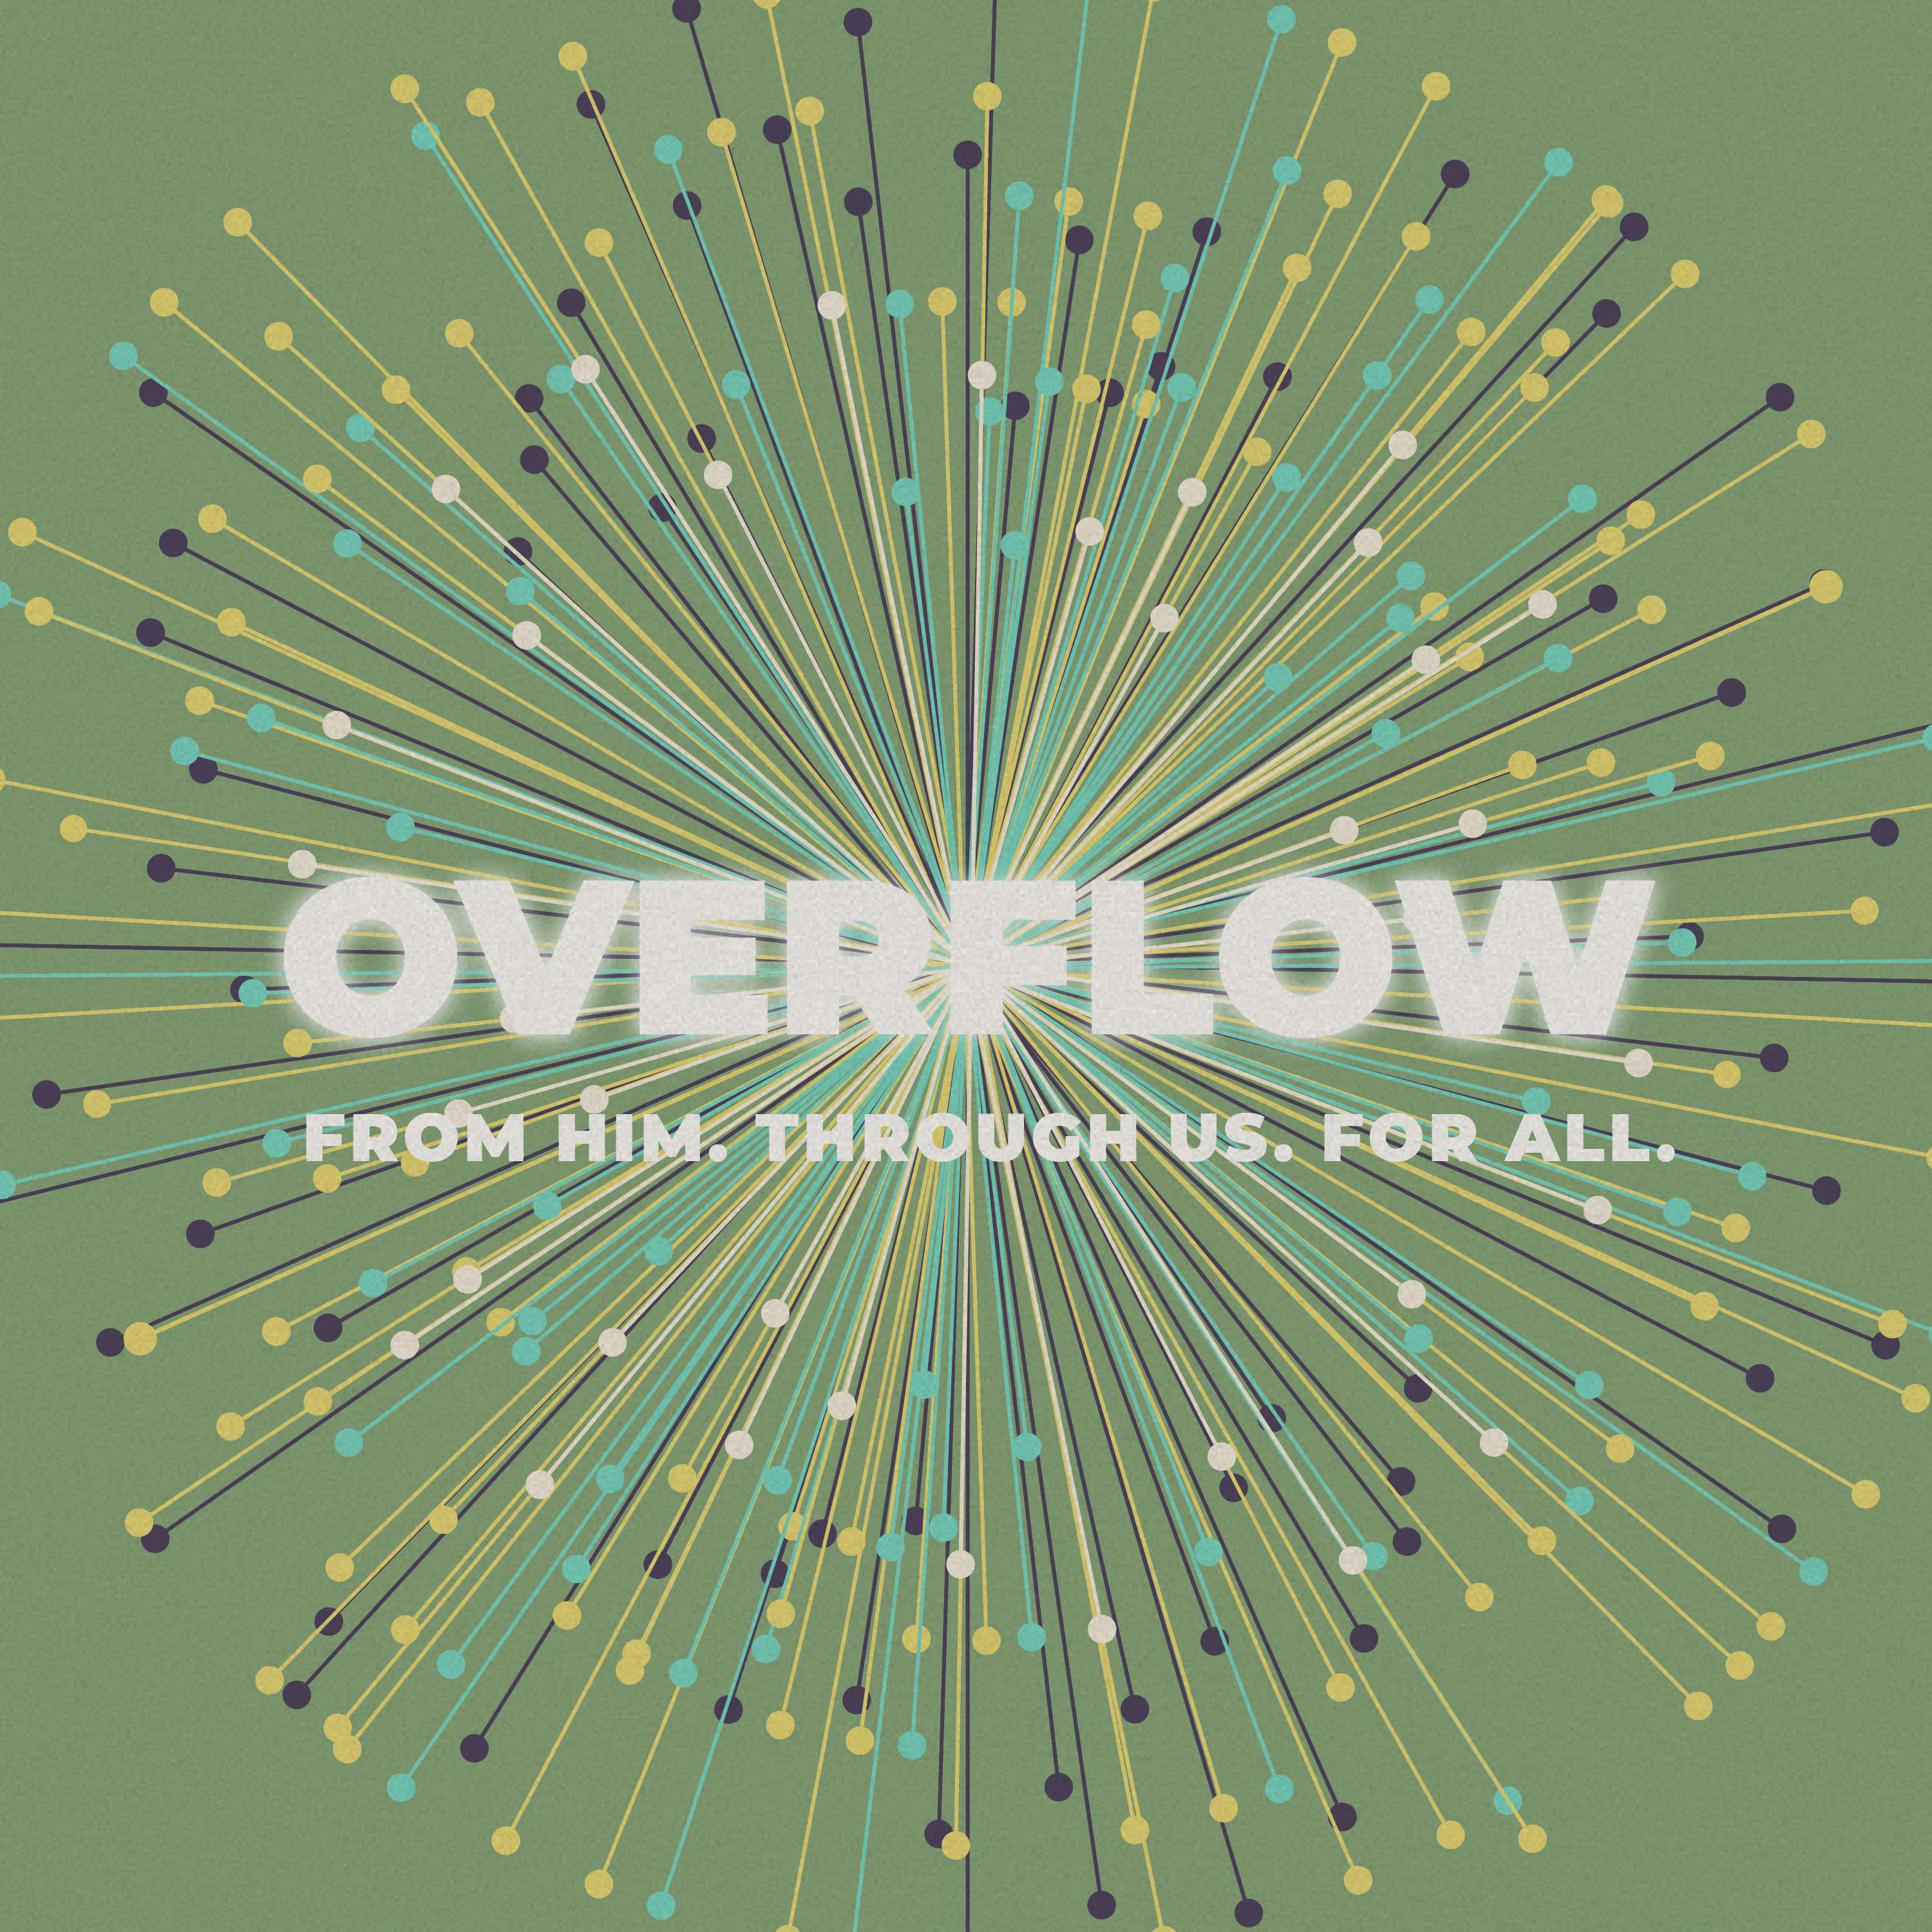 Overflow: From Him, Through Us, For All: Giving and Love - Part 2 - Woodside Bible Church